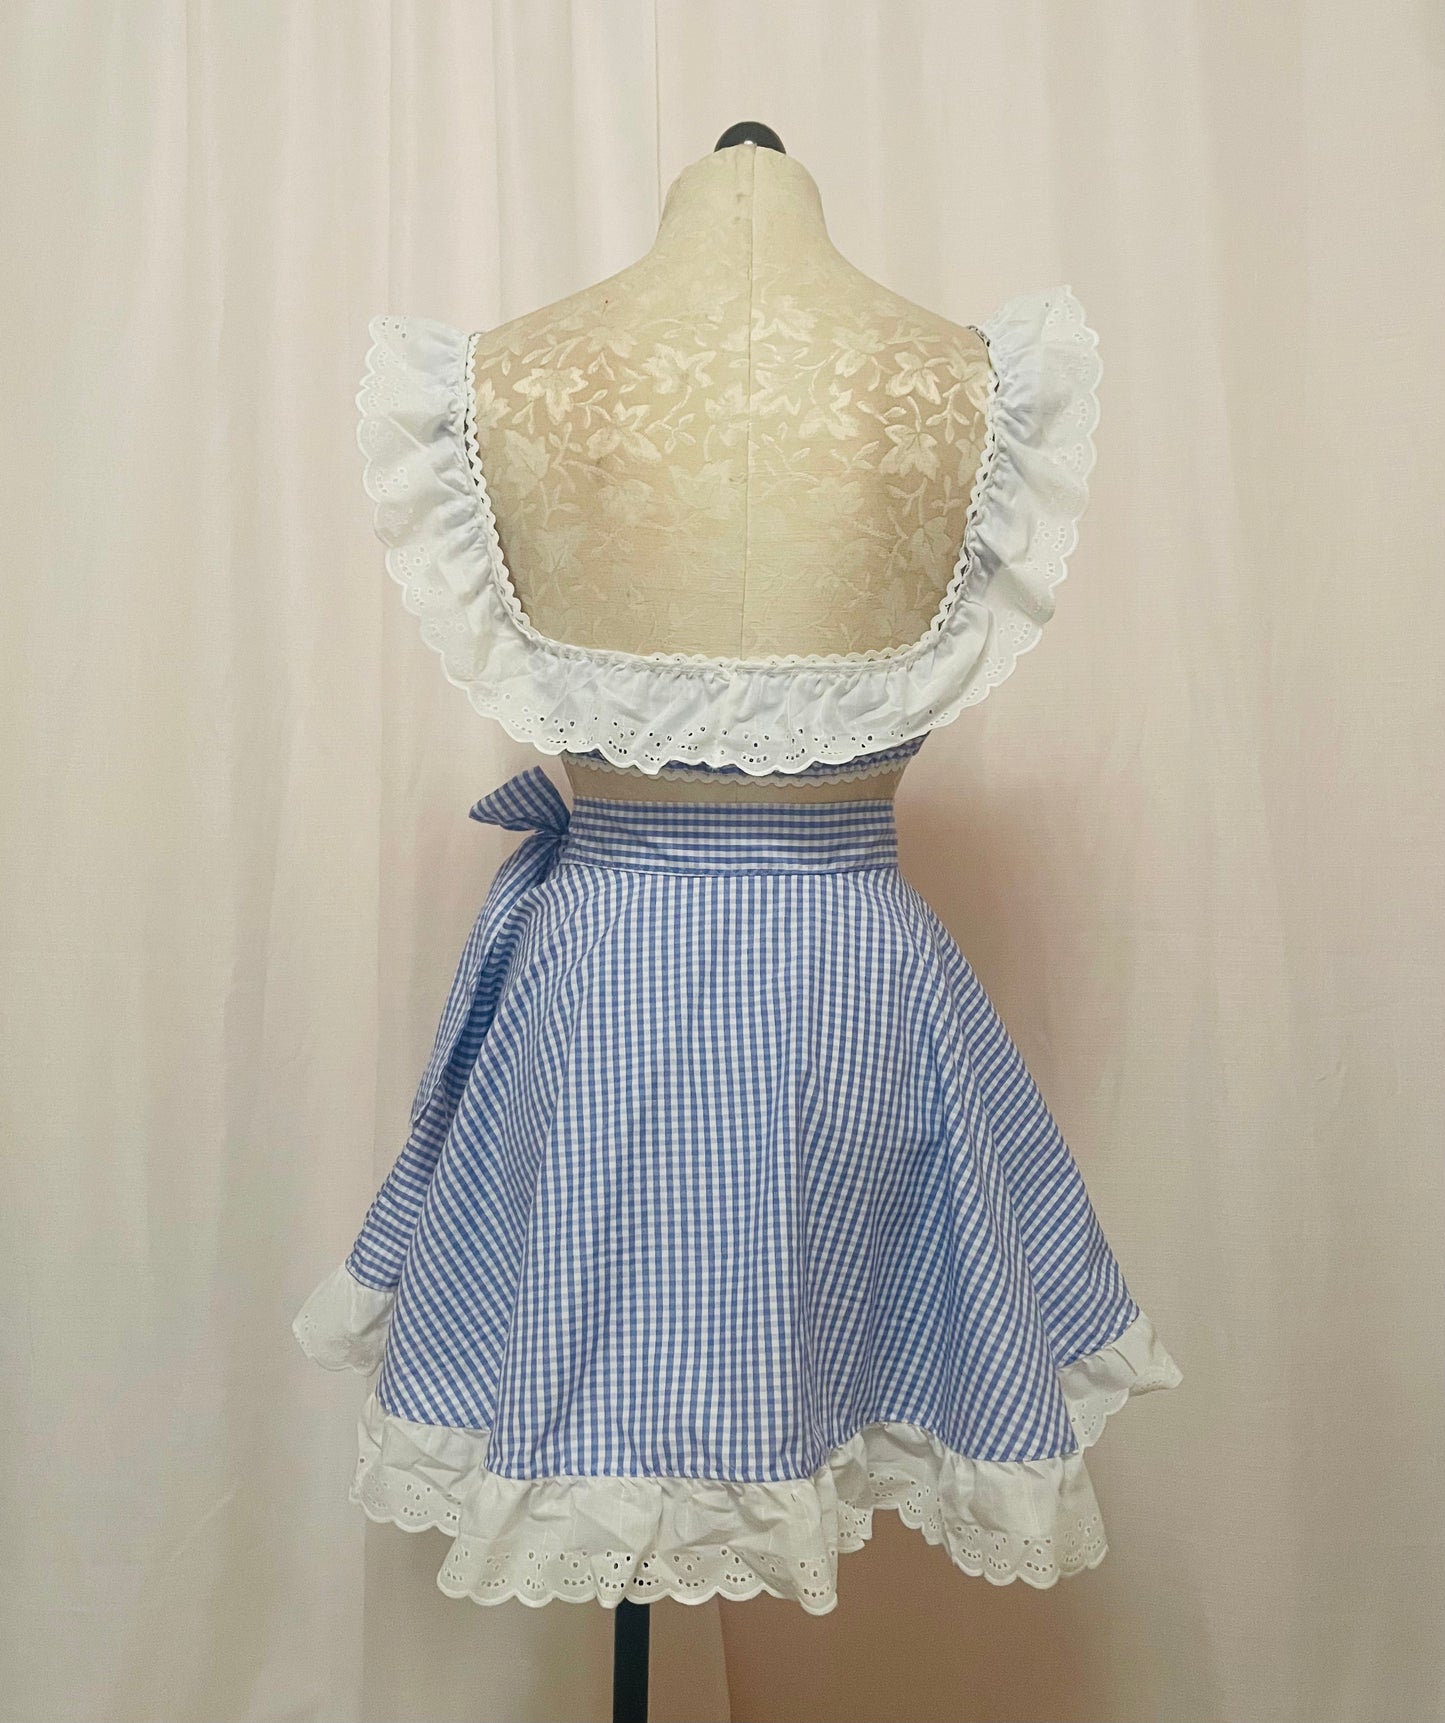 The Dolly Set in Blue Gingham